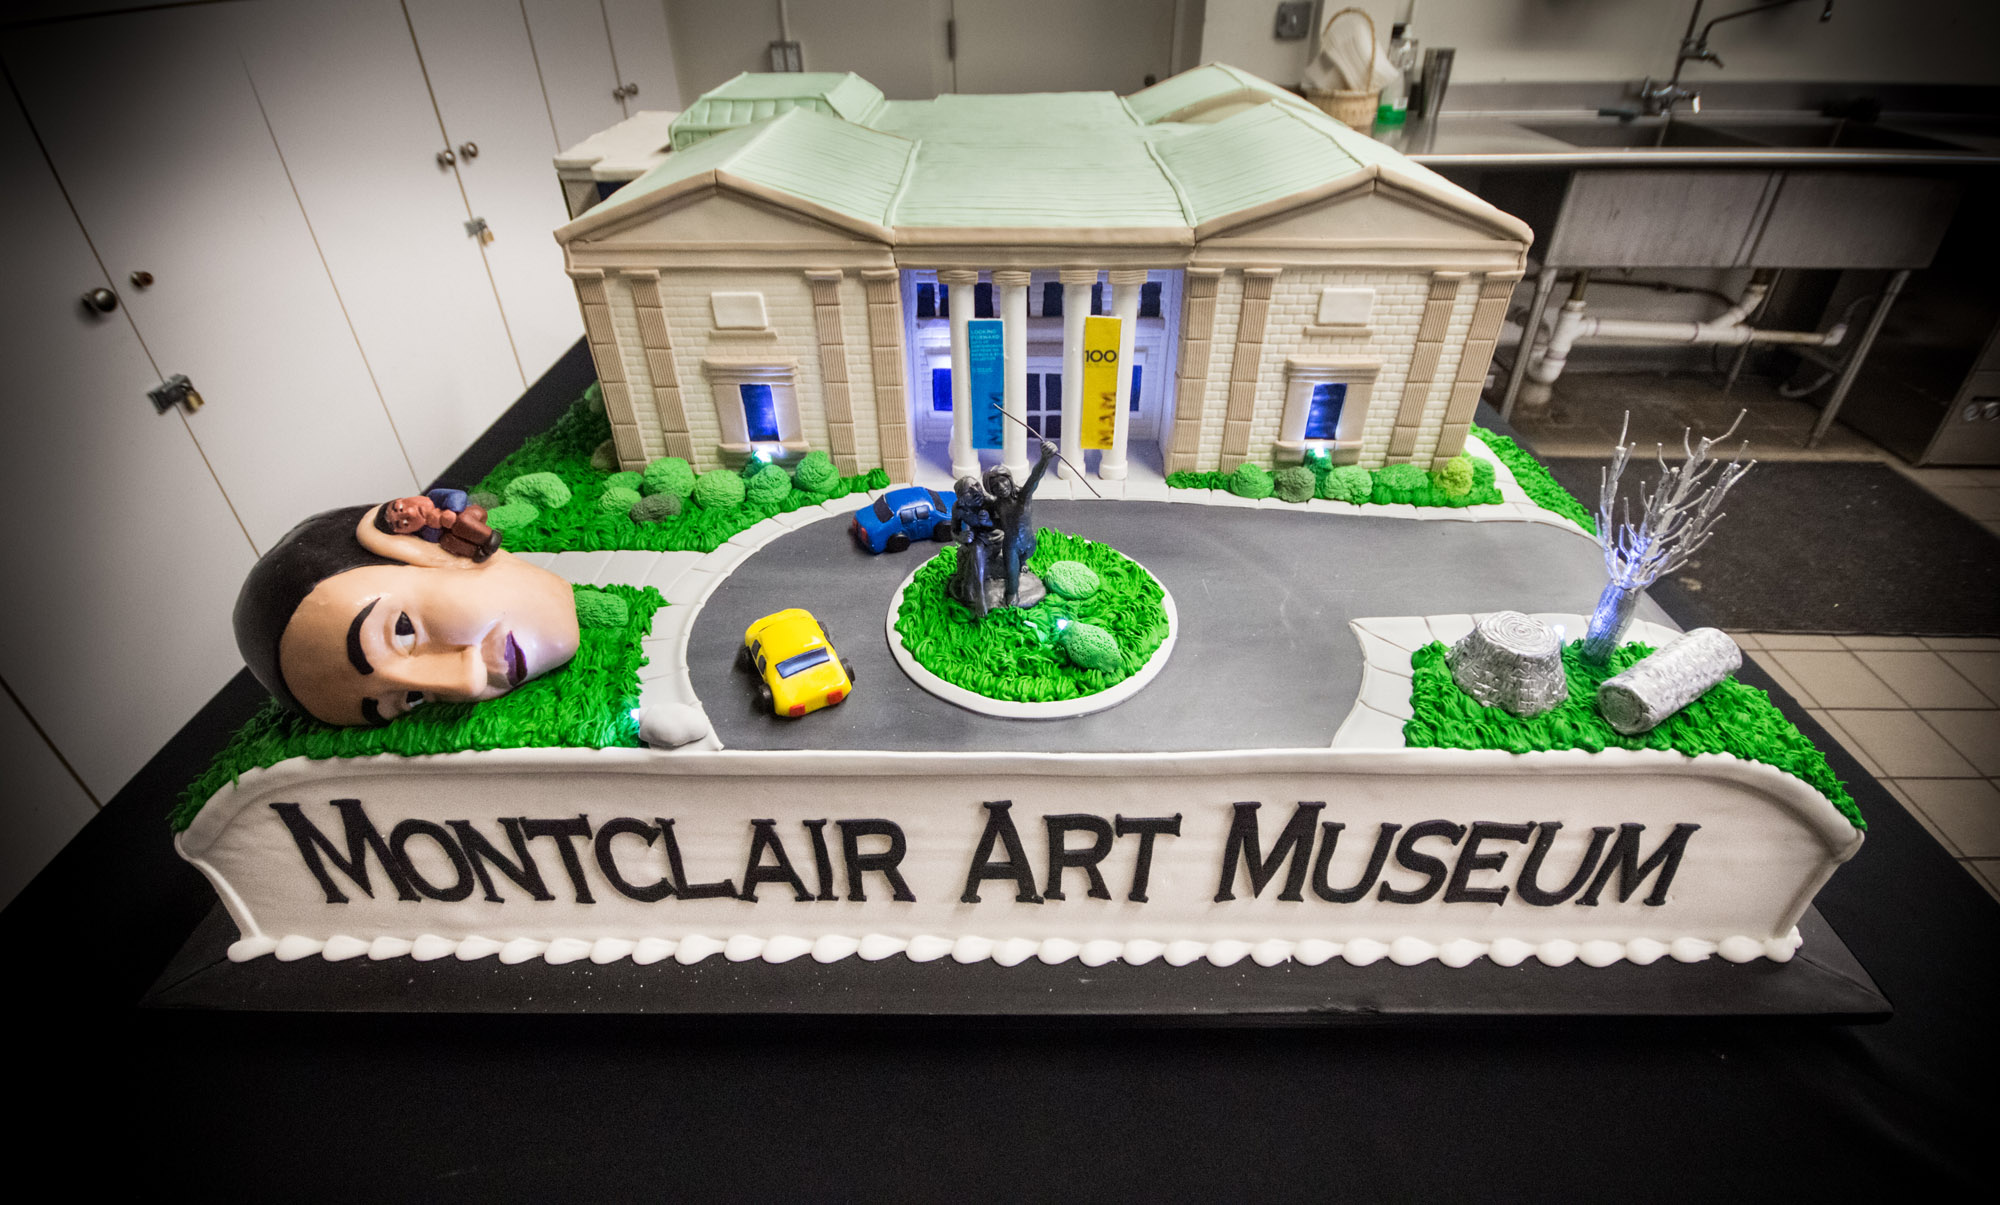 Montclair Art Museum celebrated its 100 years with a Centennial cake 